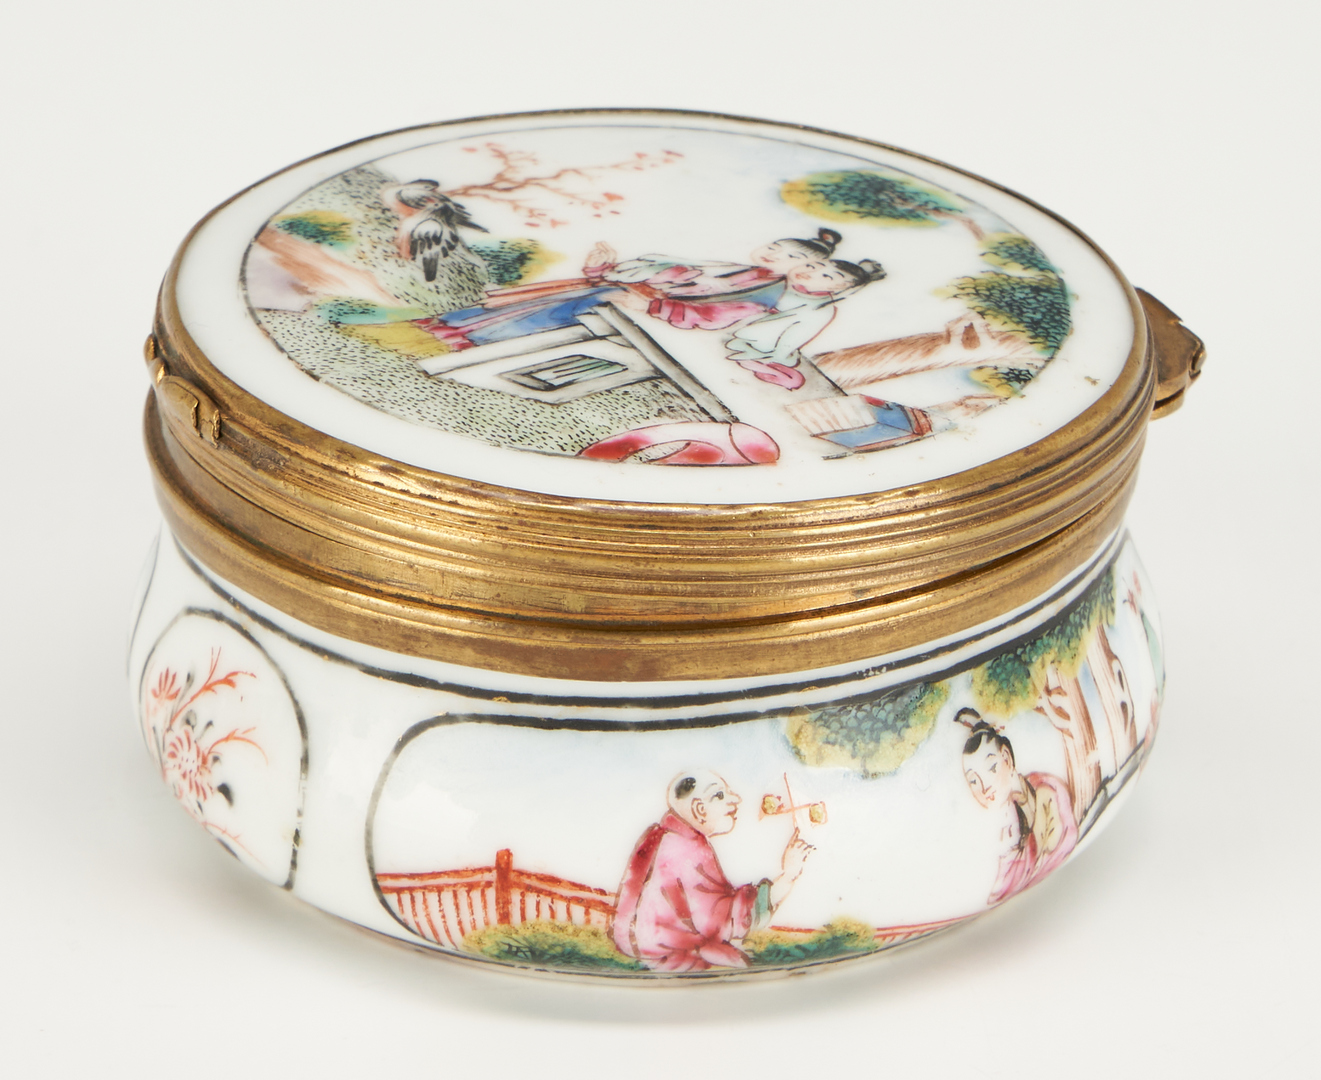 Lot 30: 4 Chinese Export Porcelain Items incl. Snuff or Paste Box